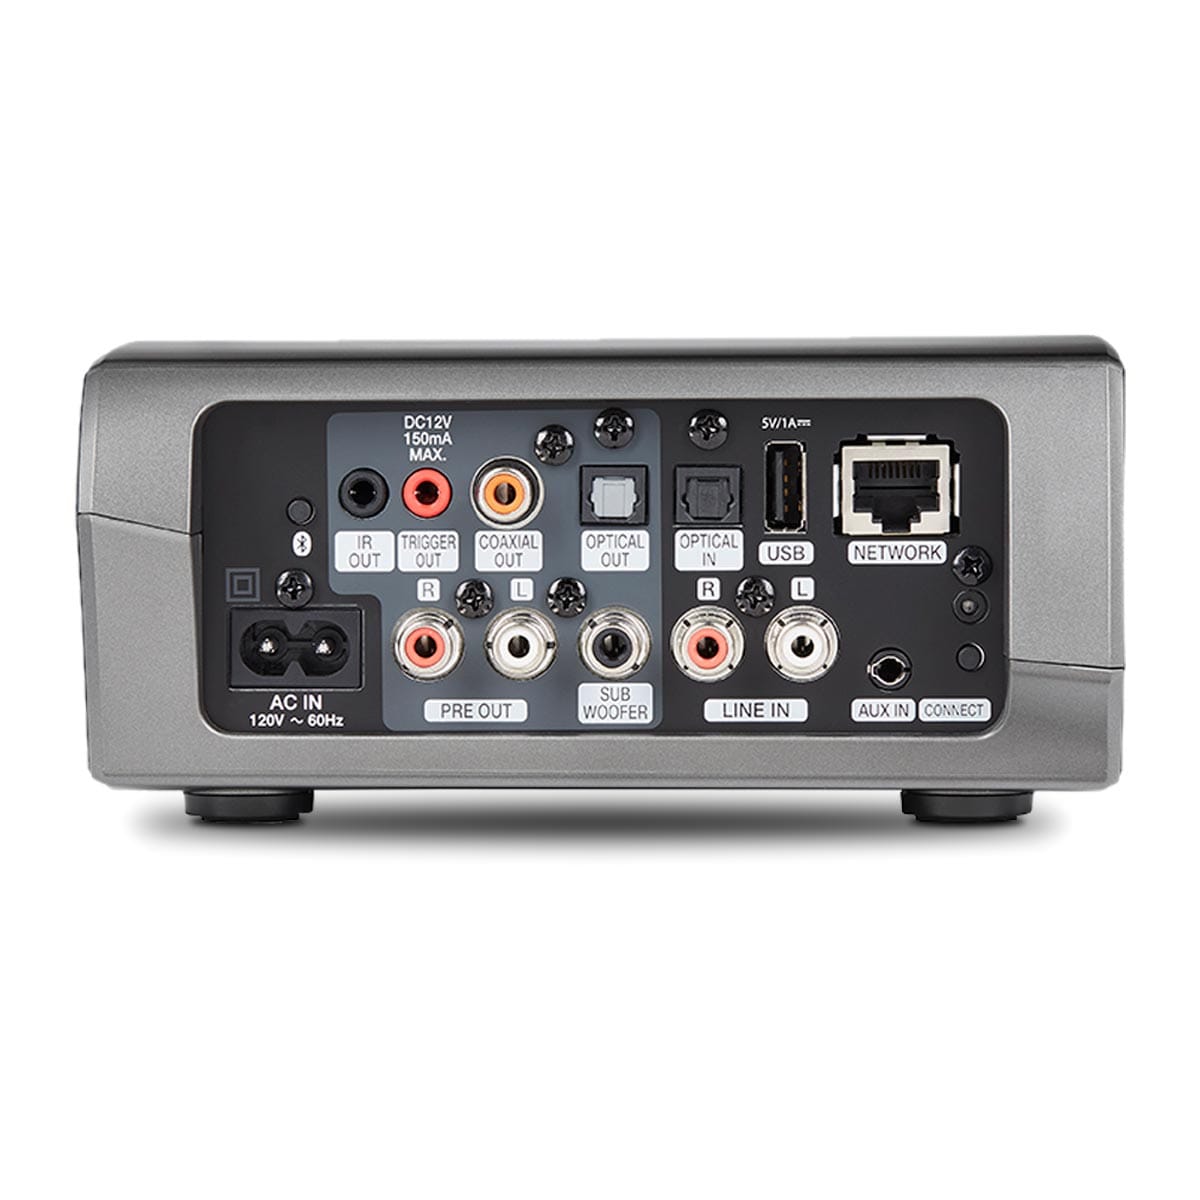 HEOS HEOS LINK HS2 Wireless Network Player Pre Amplifiers